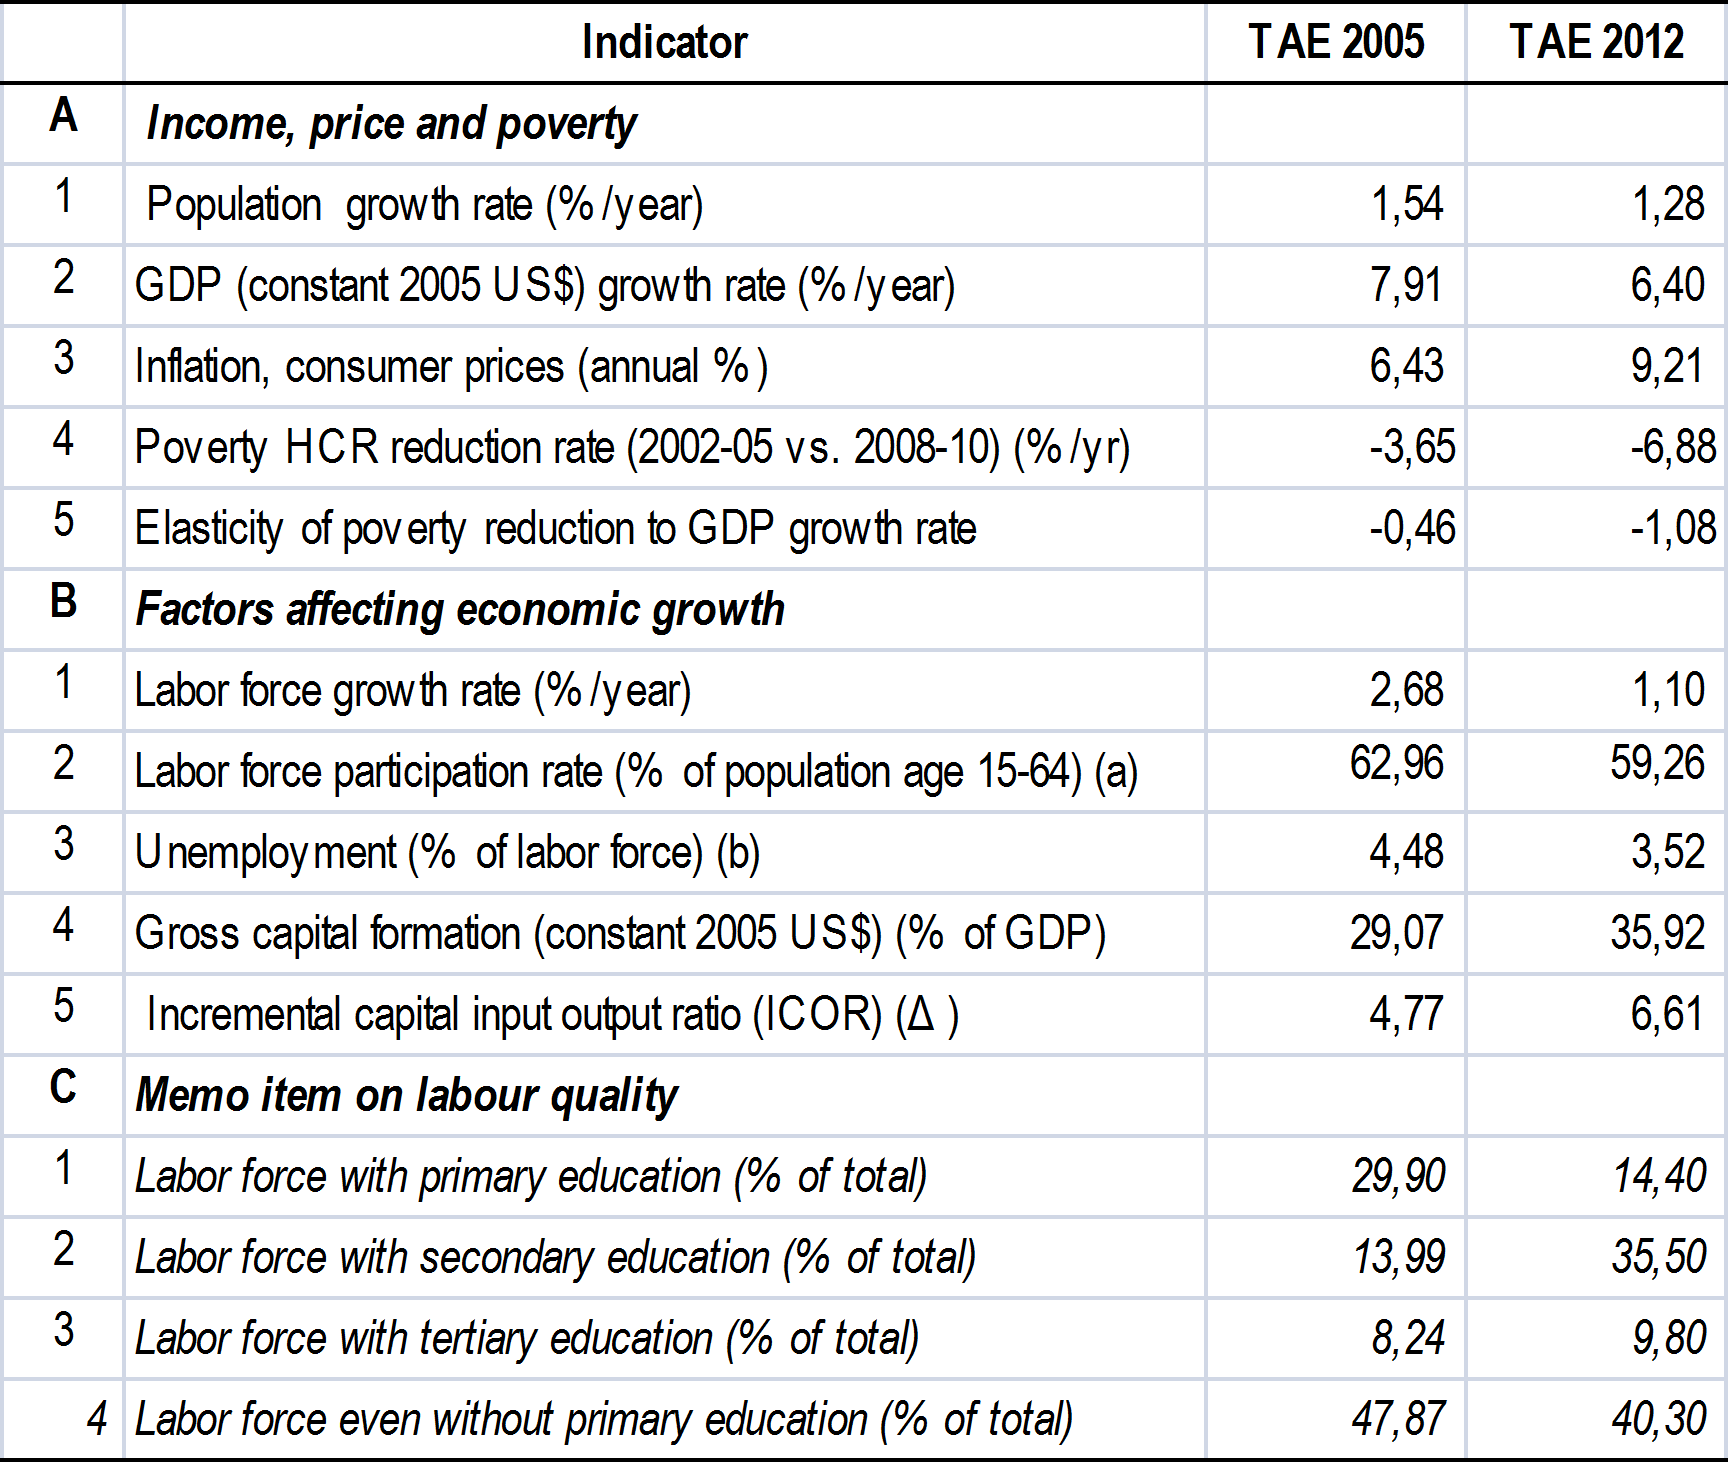 Table 2 Economic Growth and its Determinants in South Asia Tri-annum Average Ending 2005 and 2012